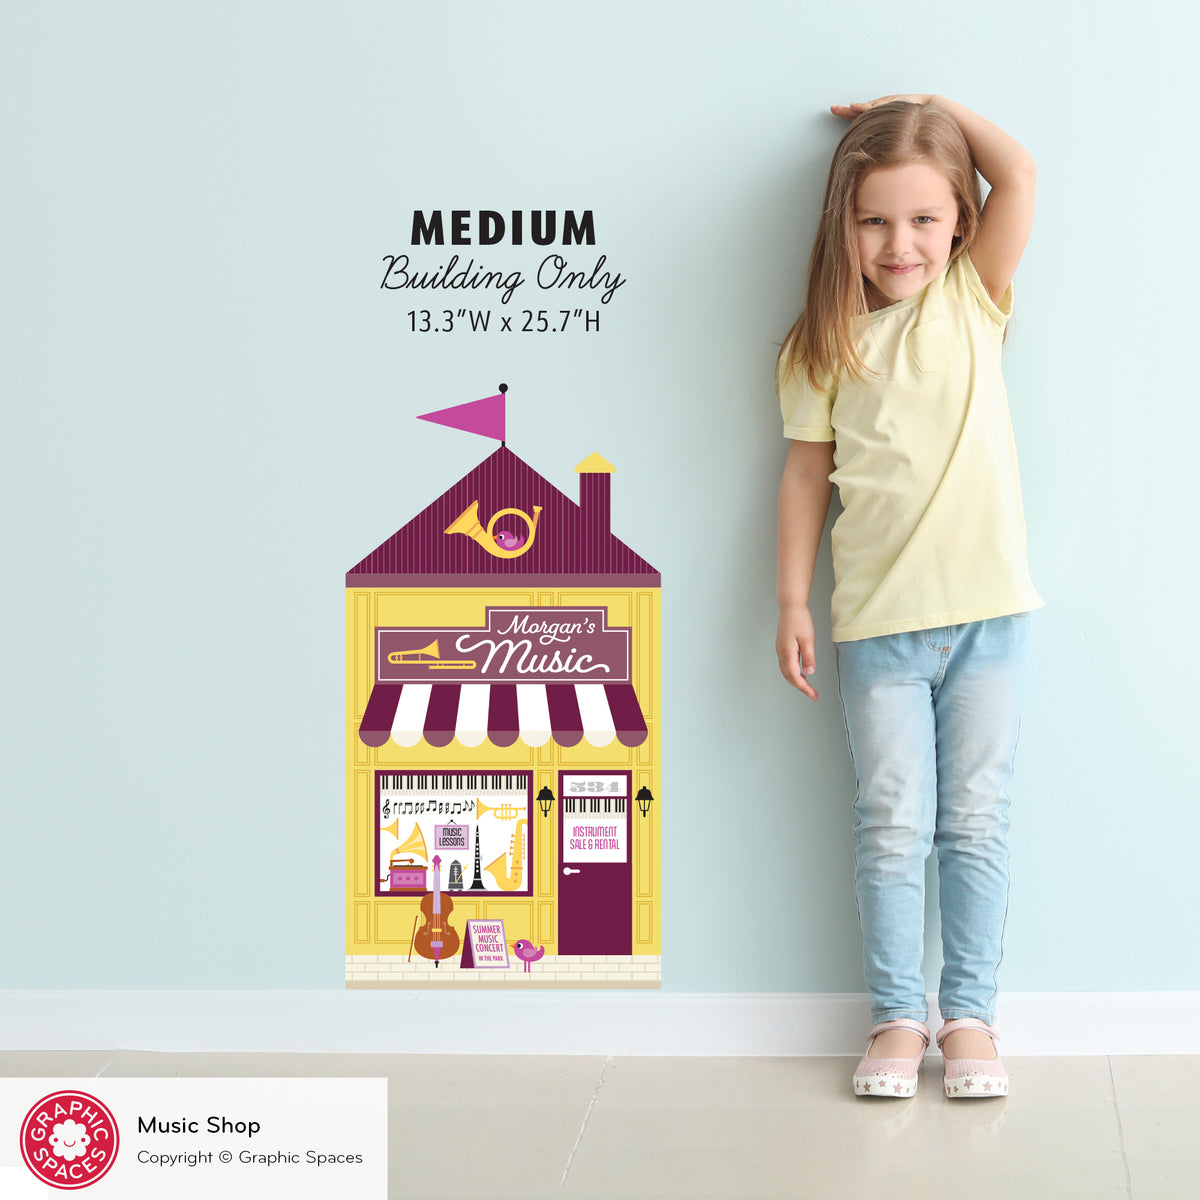 Music Shop Fabric Wall Decal - Happy Town